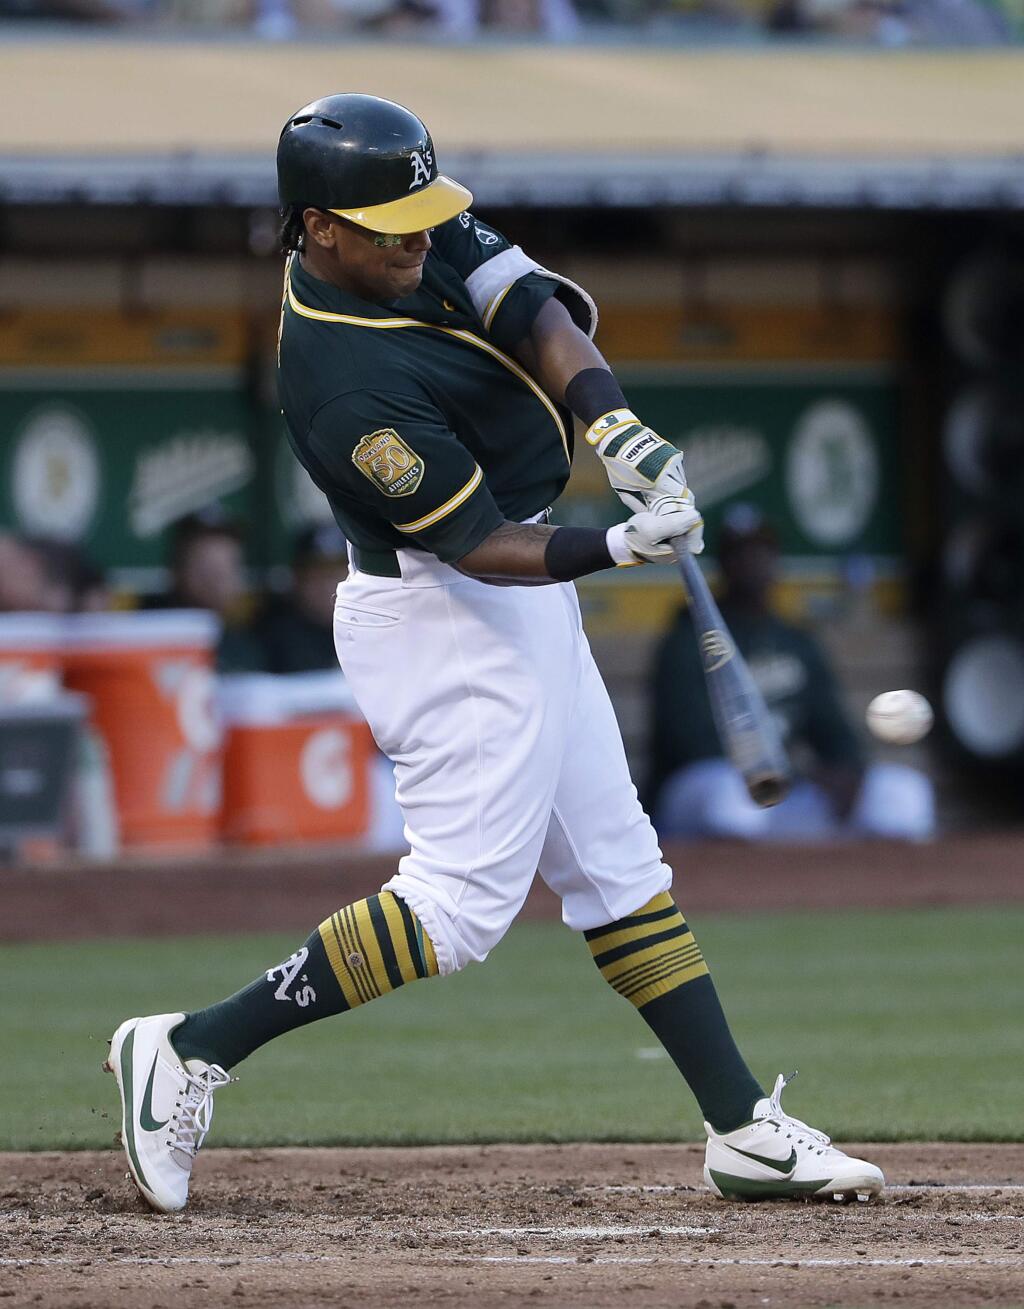 In this Aug. 4, 2018 file photo, the Oakland Athletics' Khris Davis hits a solo home run against the Detroit Tigers during the third inning of a baseball game in Oakland. (AP Photo/Jeff Chiu, File)